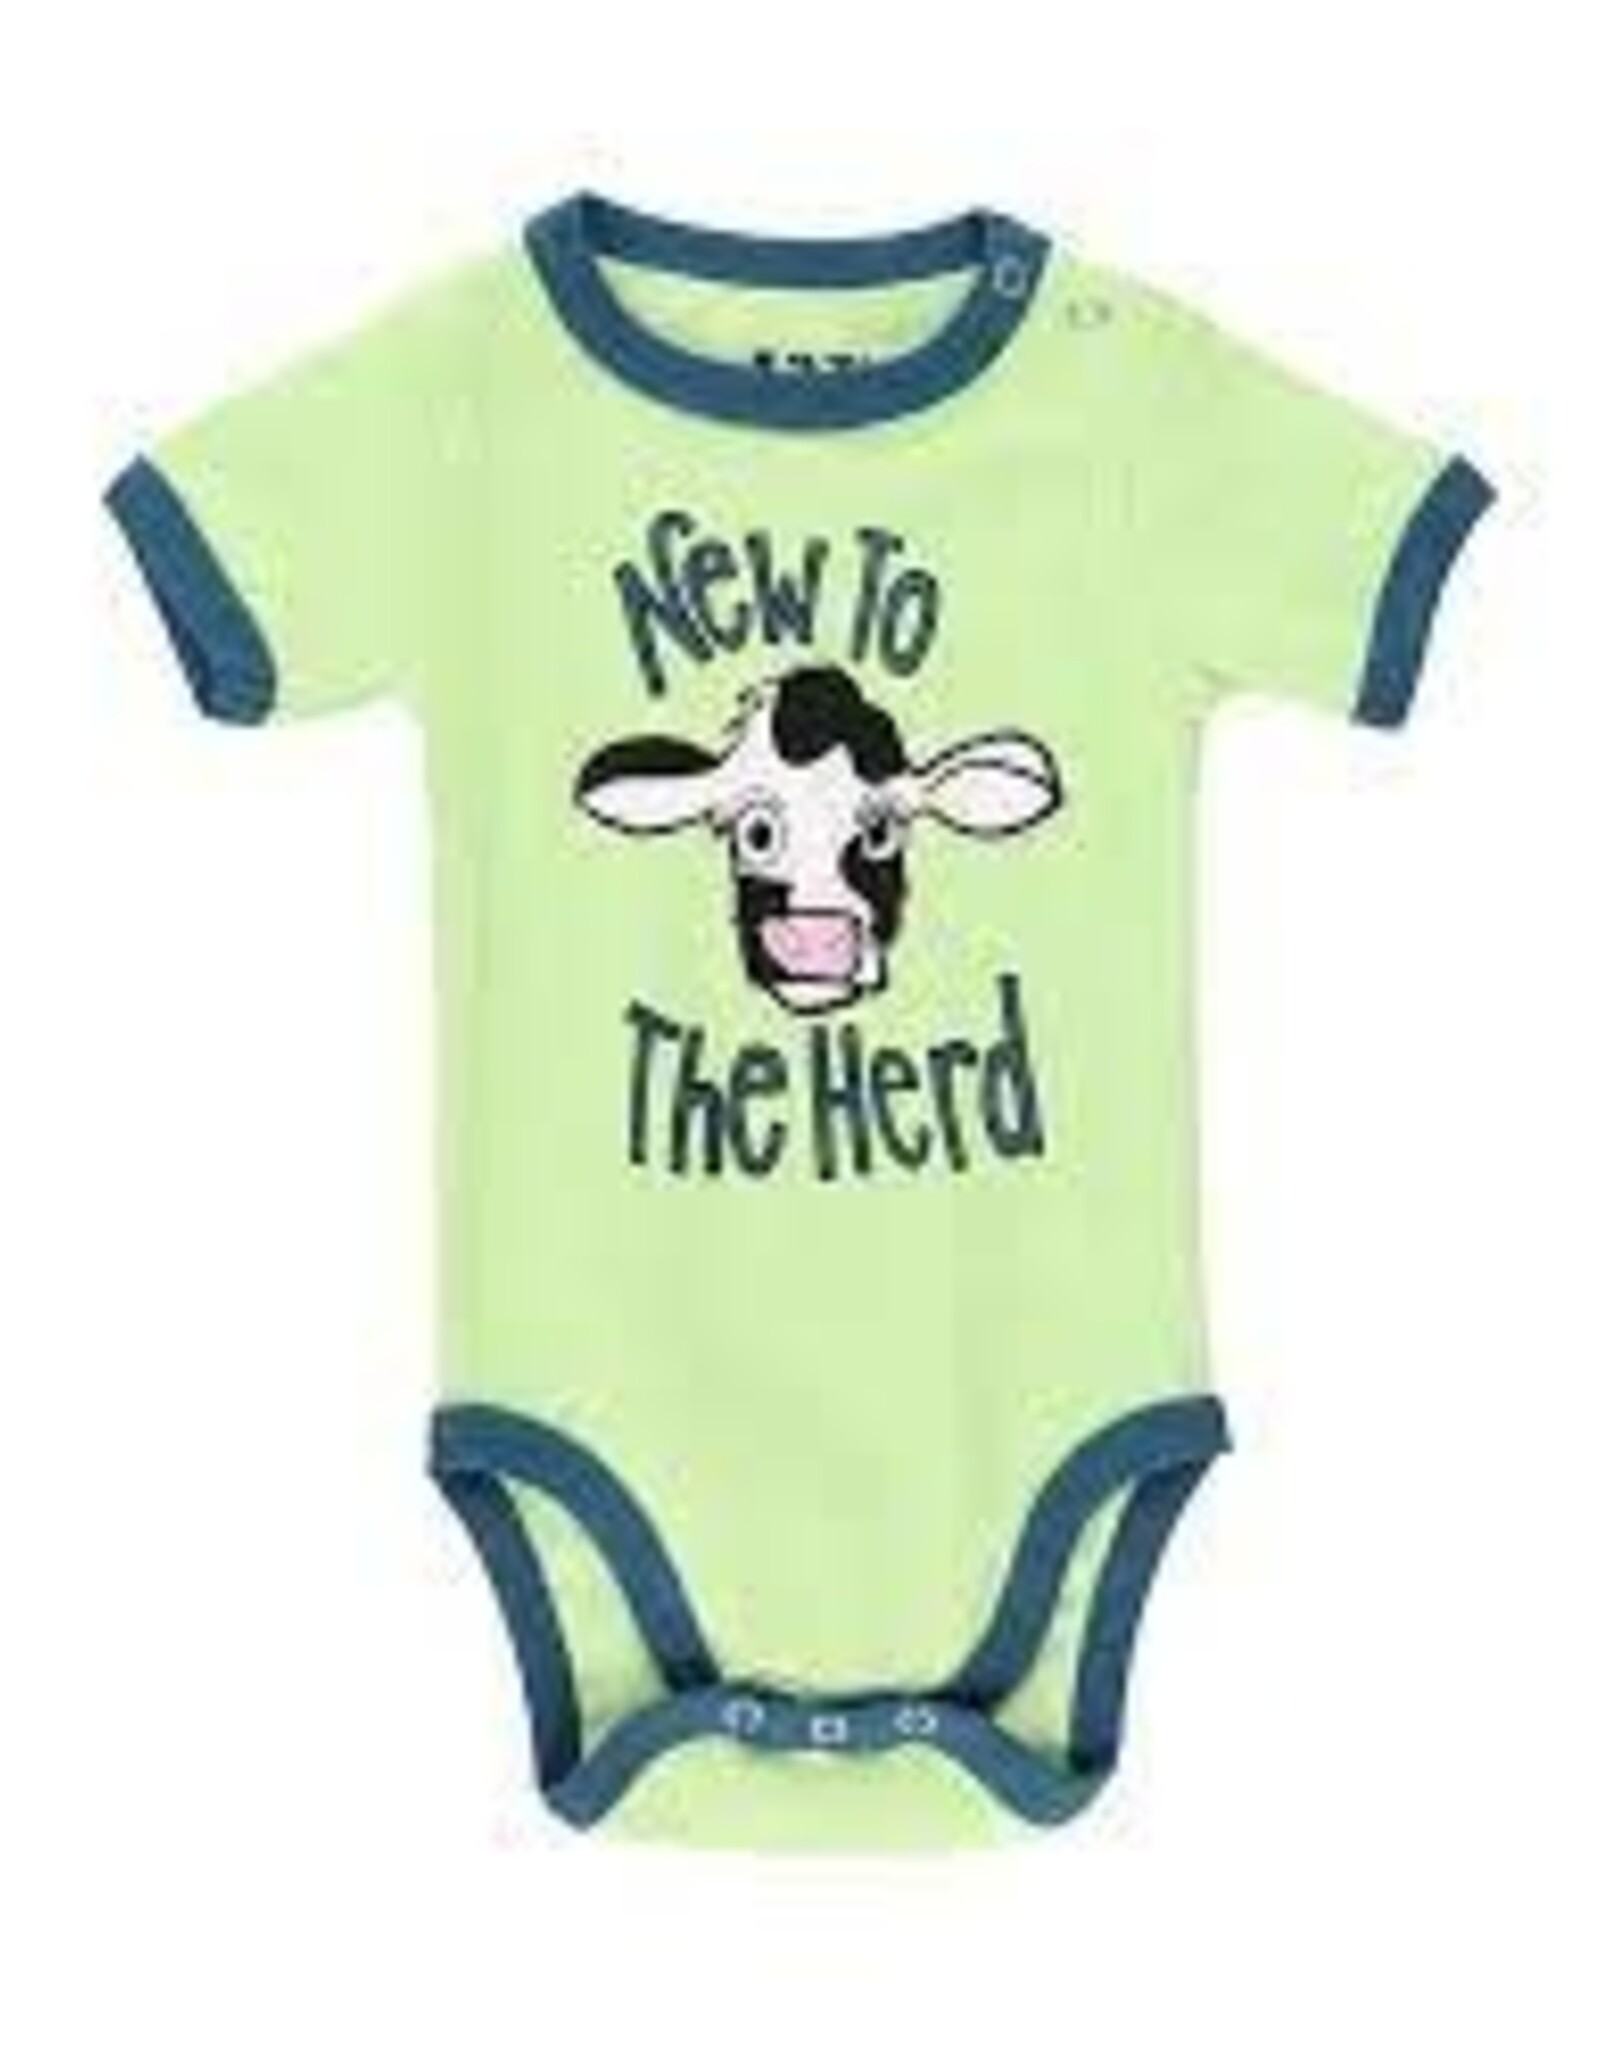 Kids Lazy One - New to the Herd Infant Creeper Onesie    (18MO)